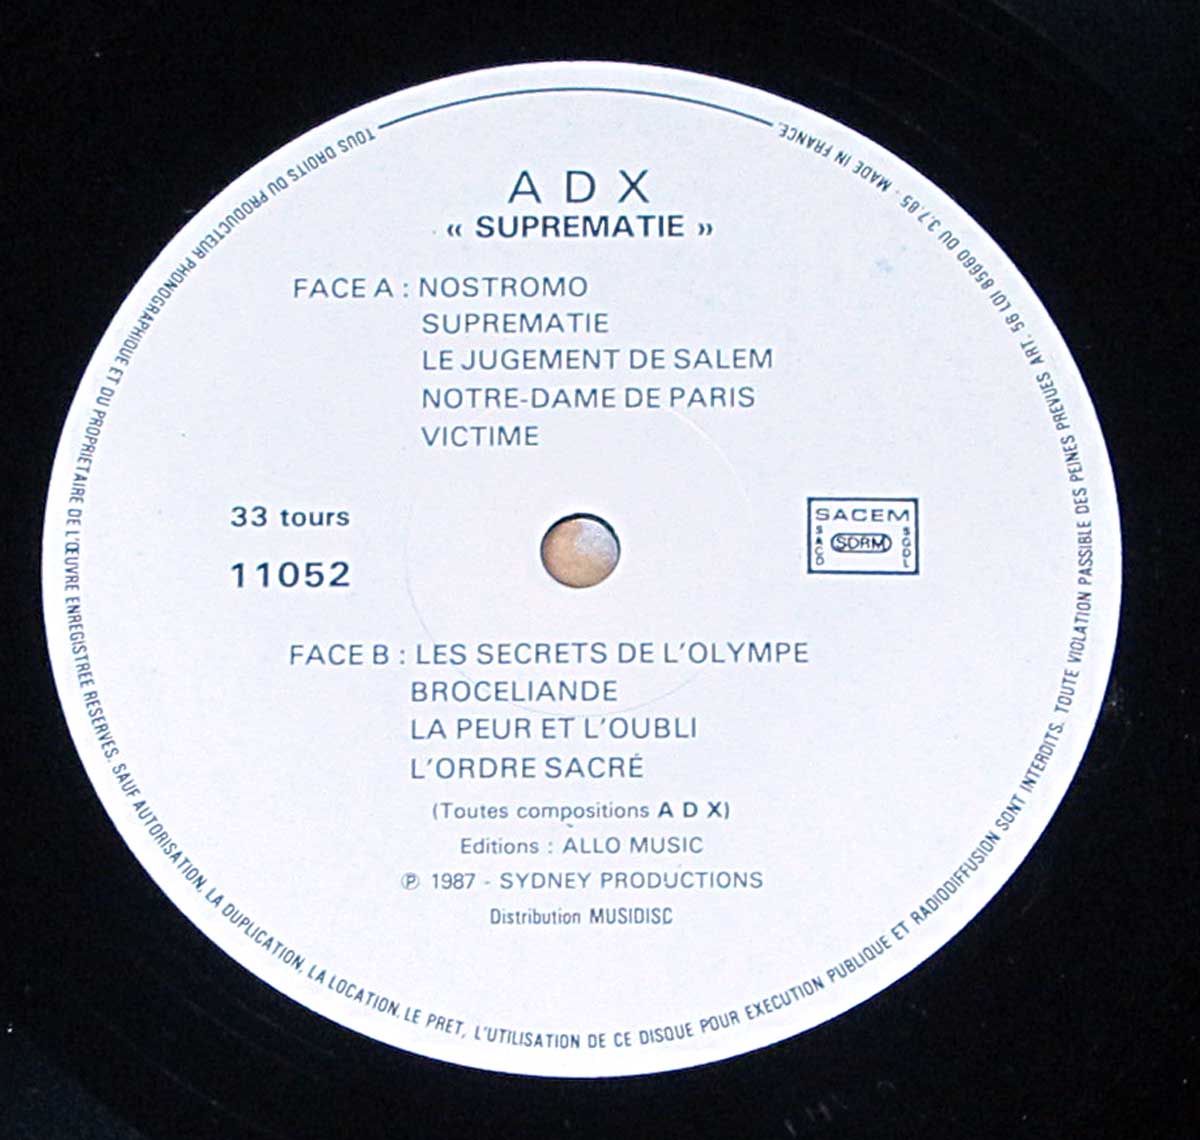 Enlarged High Resolution Photo of the Record's label ADX Suprematie https://vinyl-records.nl